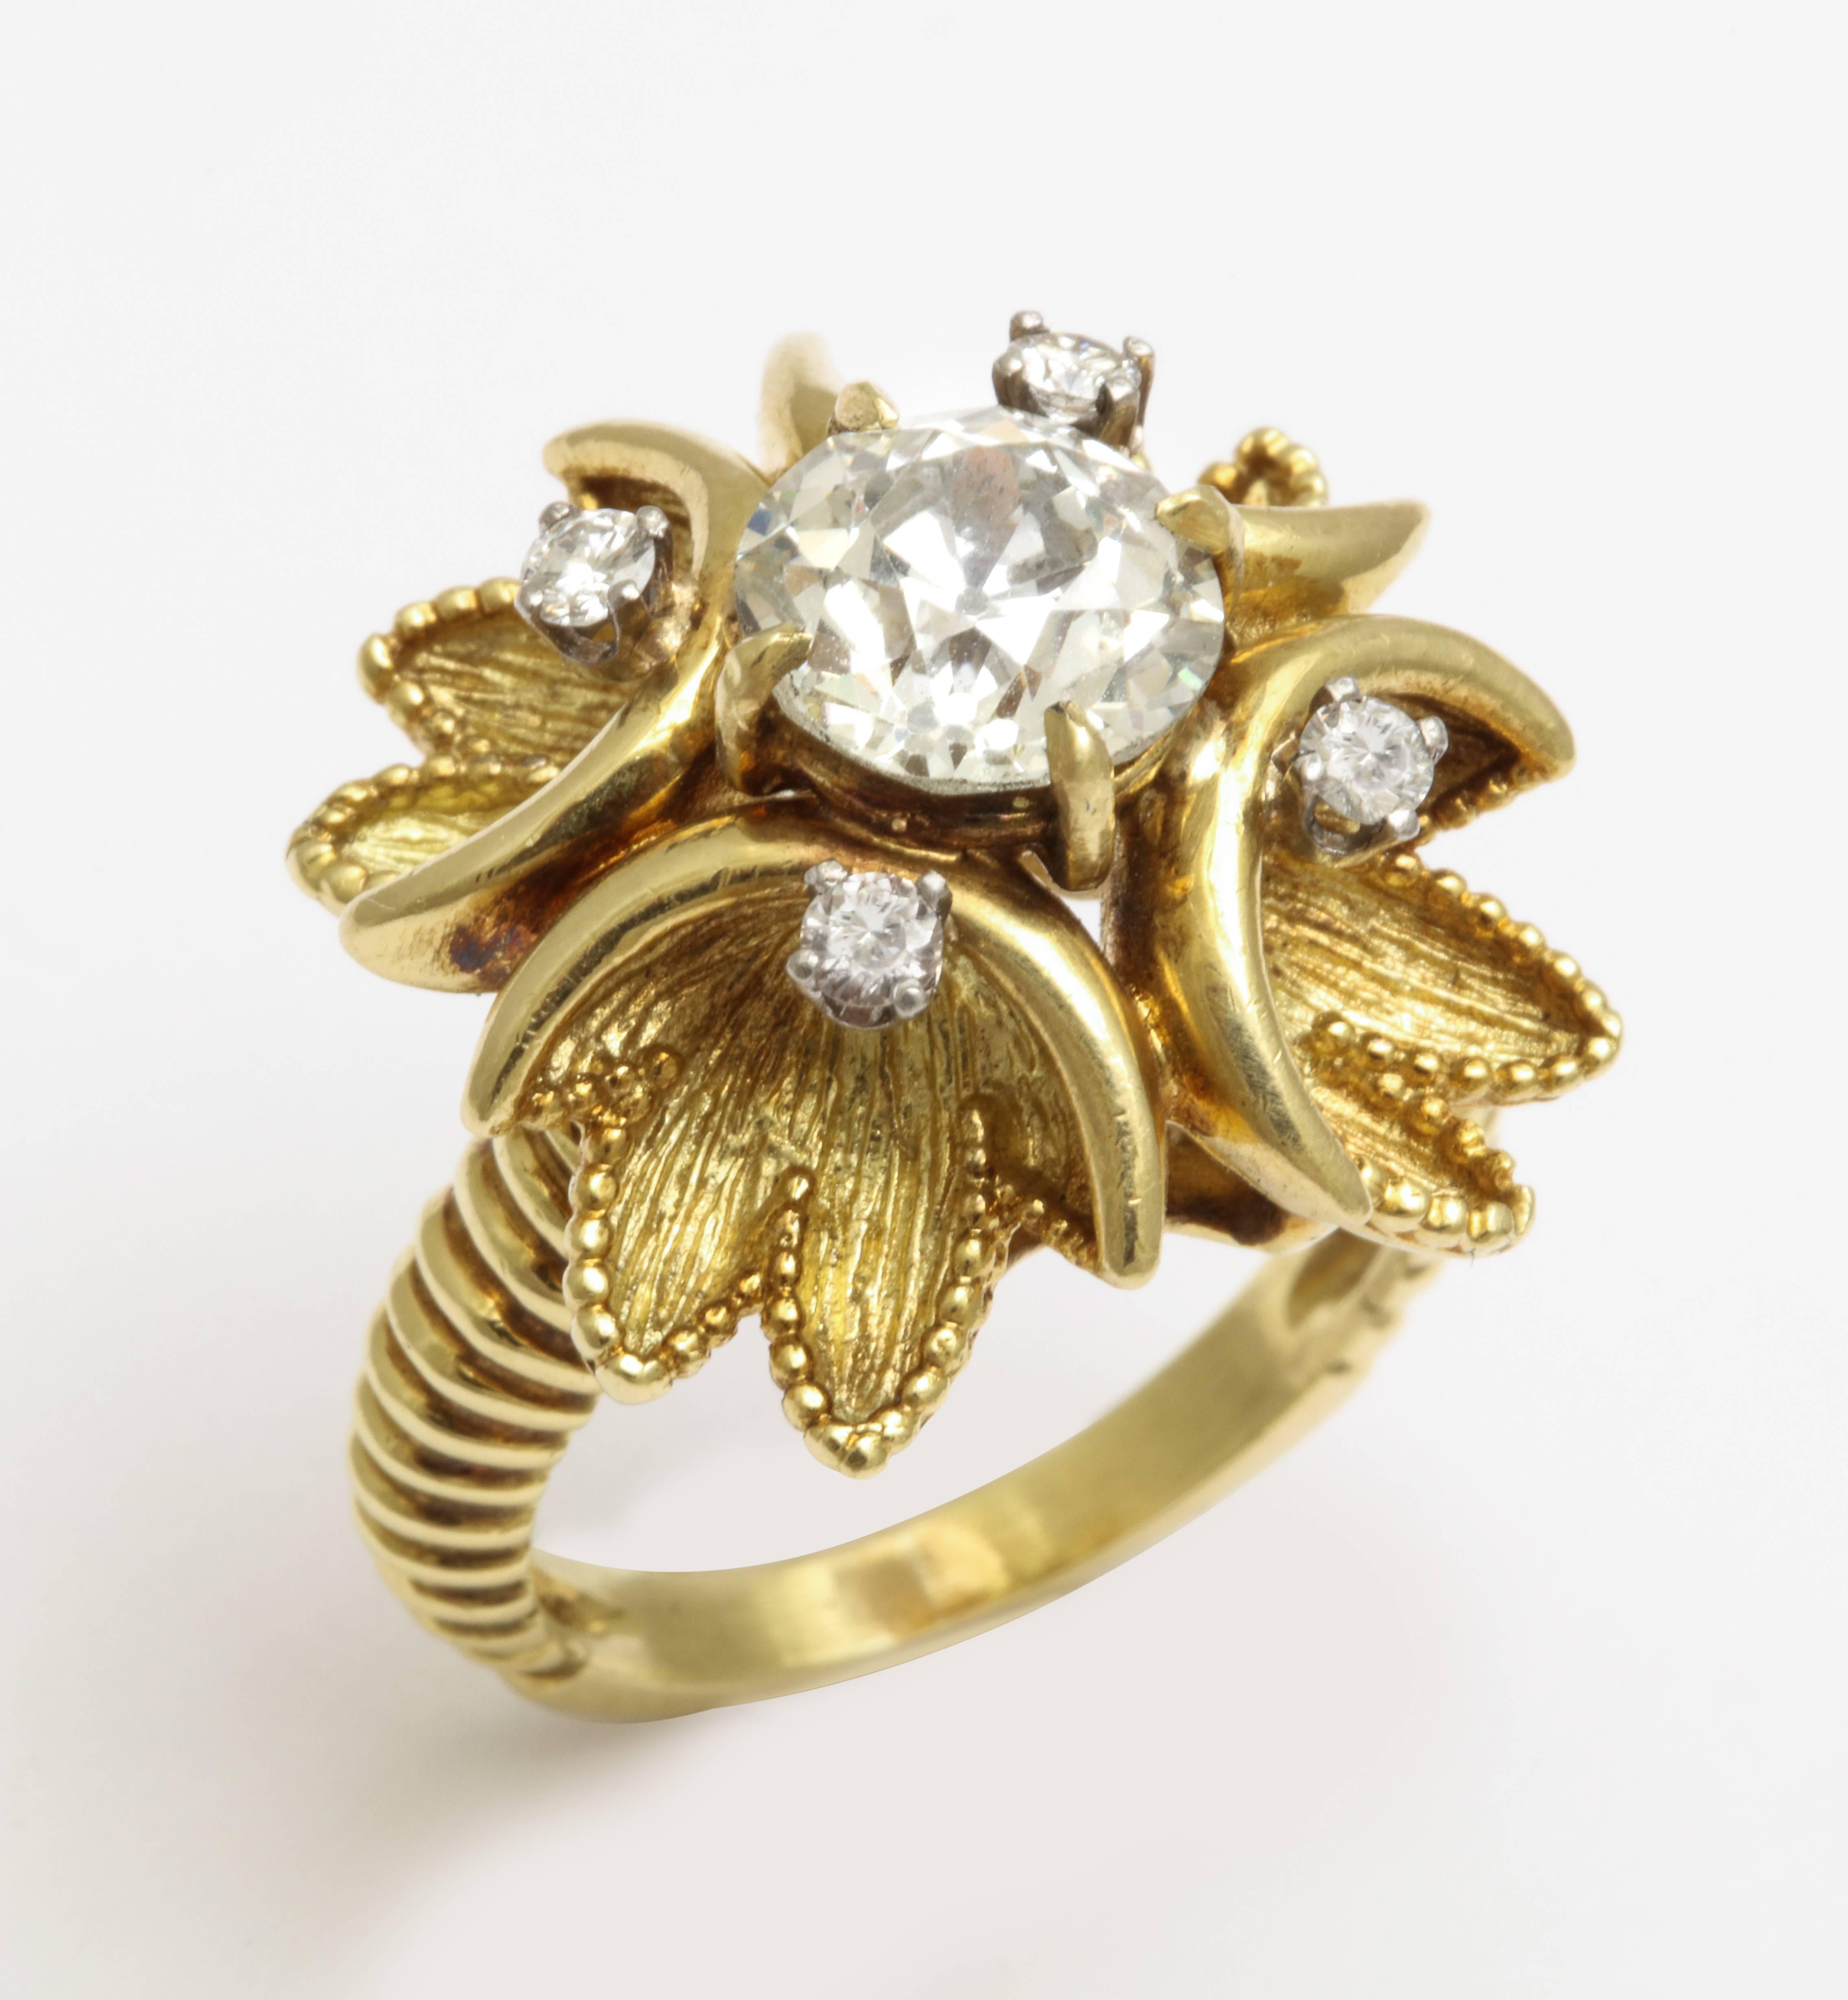 A cocktail ring by Cartier featuring a 2.25 carat old european cut diamond center. Flanked by four round brilliant cut diamonds with a total estimated weight of 0.12 carats. Set in 18 karat yellow gold and signed Cartier. Circa 1950s. Ring size 7.